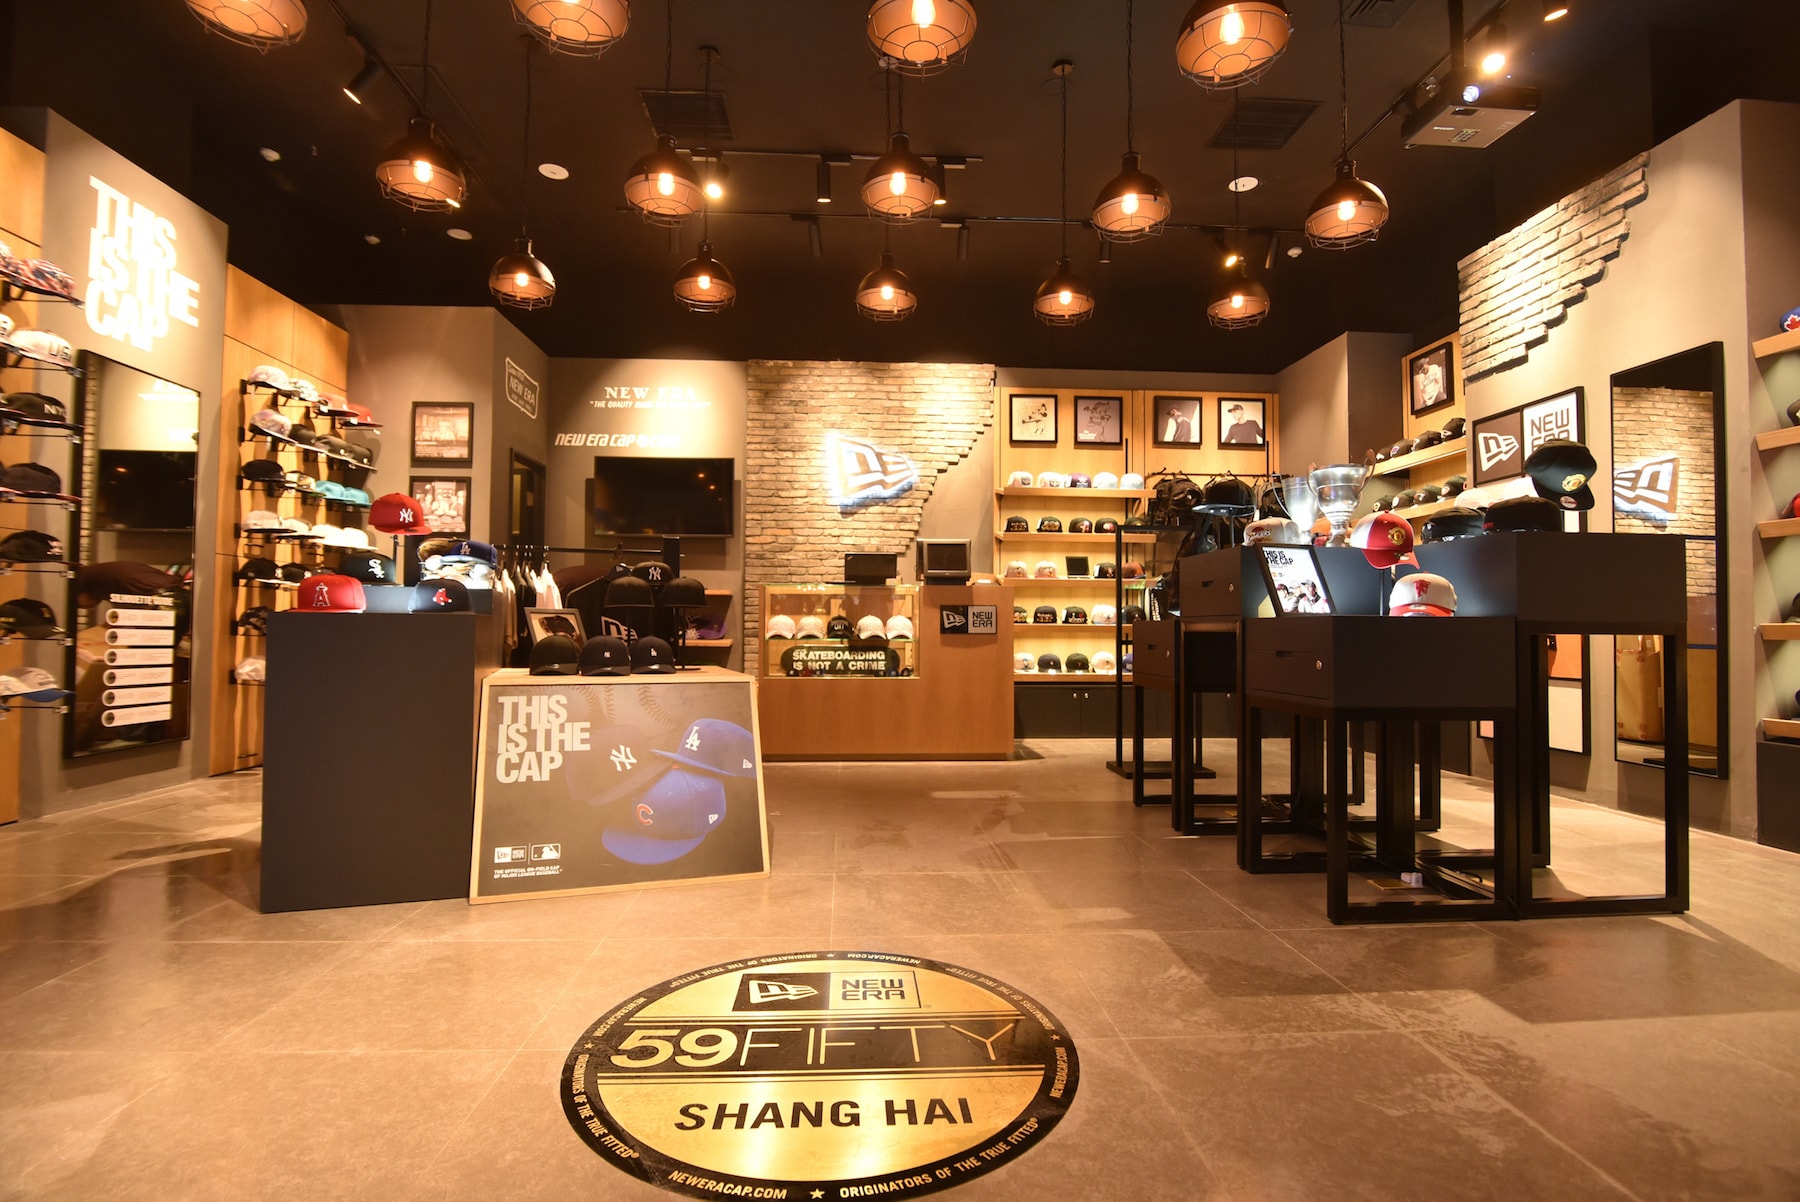 New Era First Store in China